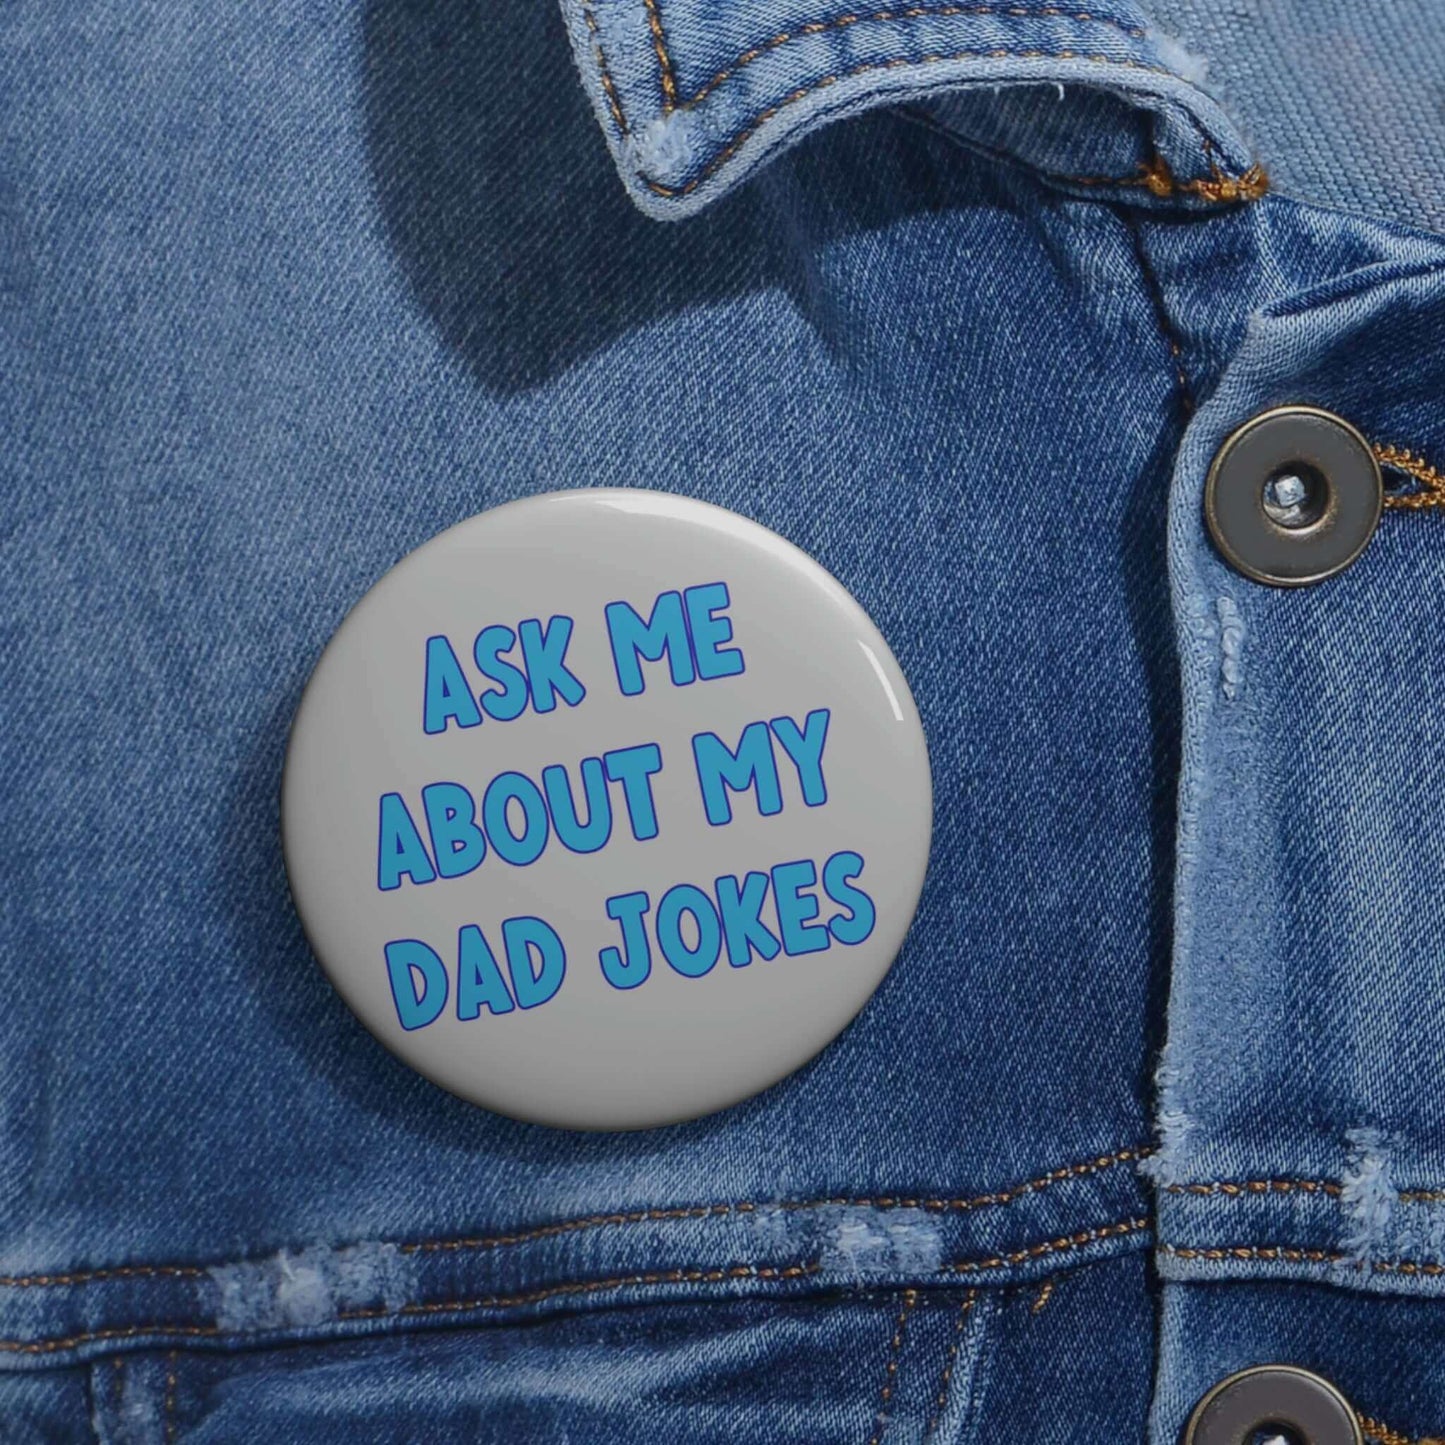 Ask me about my Dad jokes funny pinback button